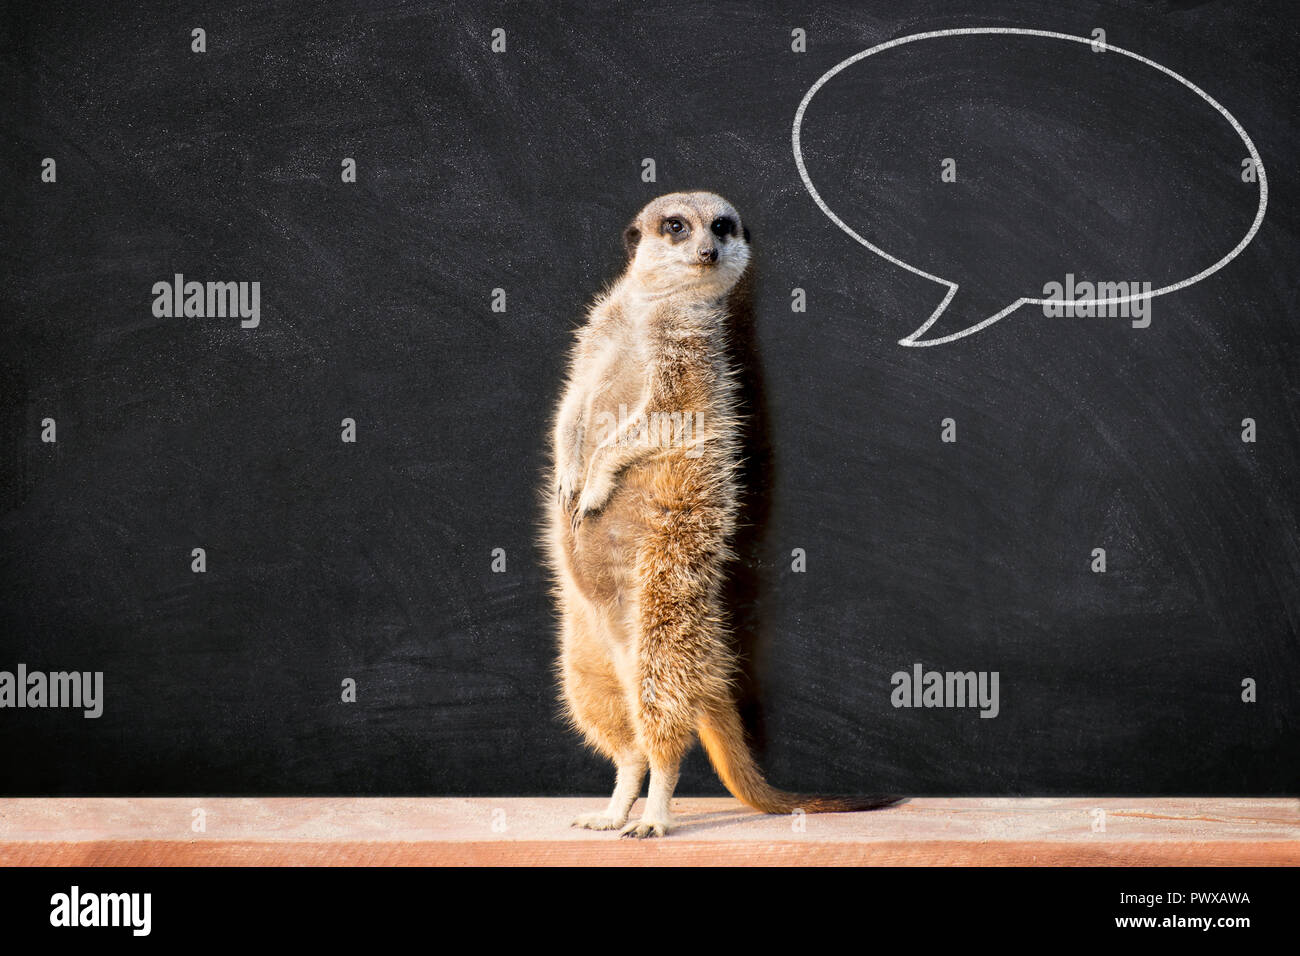 Portrait of a meerkat standing and looking alert against blackboard with chalk speech bubble.  Funny “back to school” concept. Stock Photo